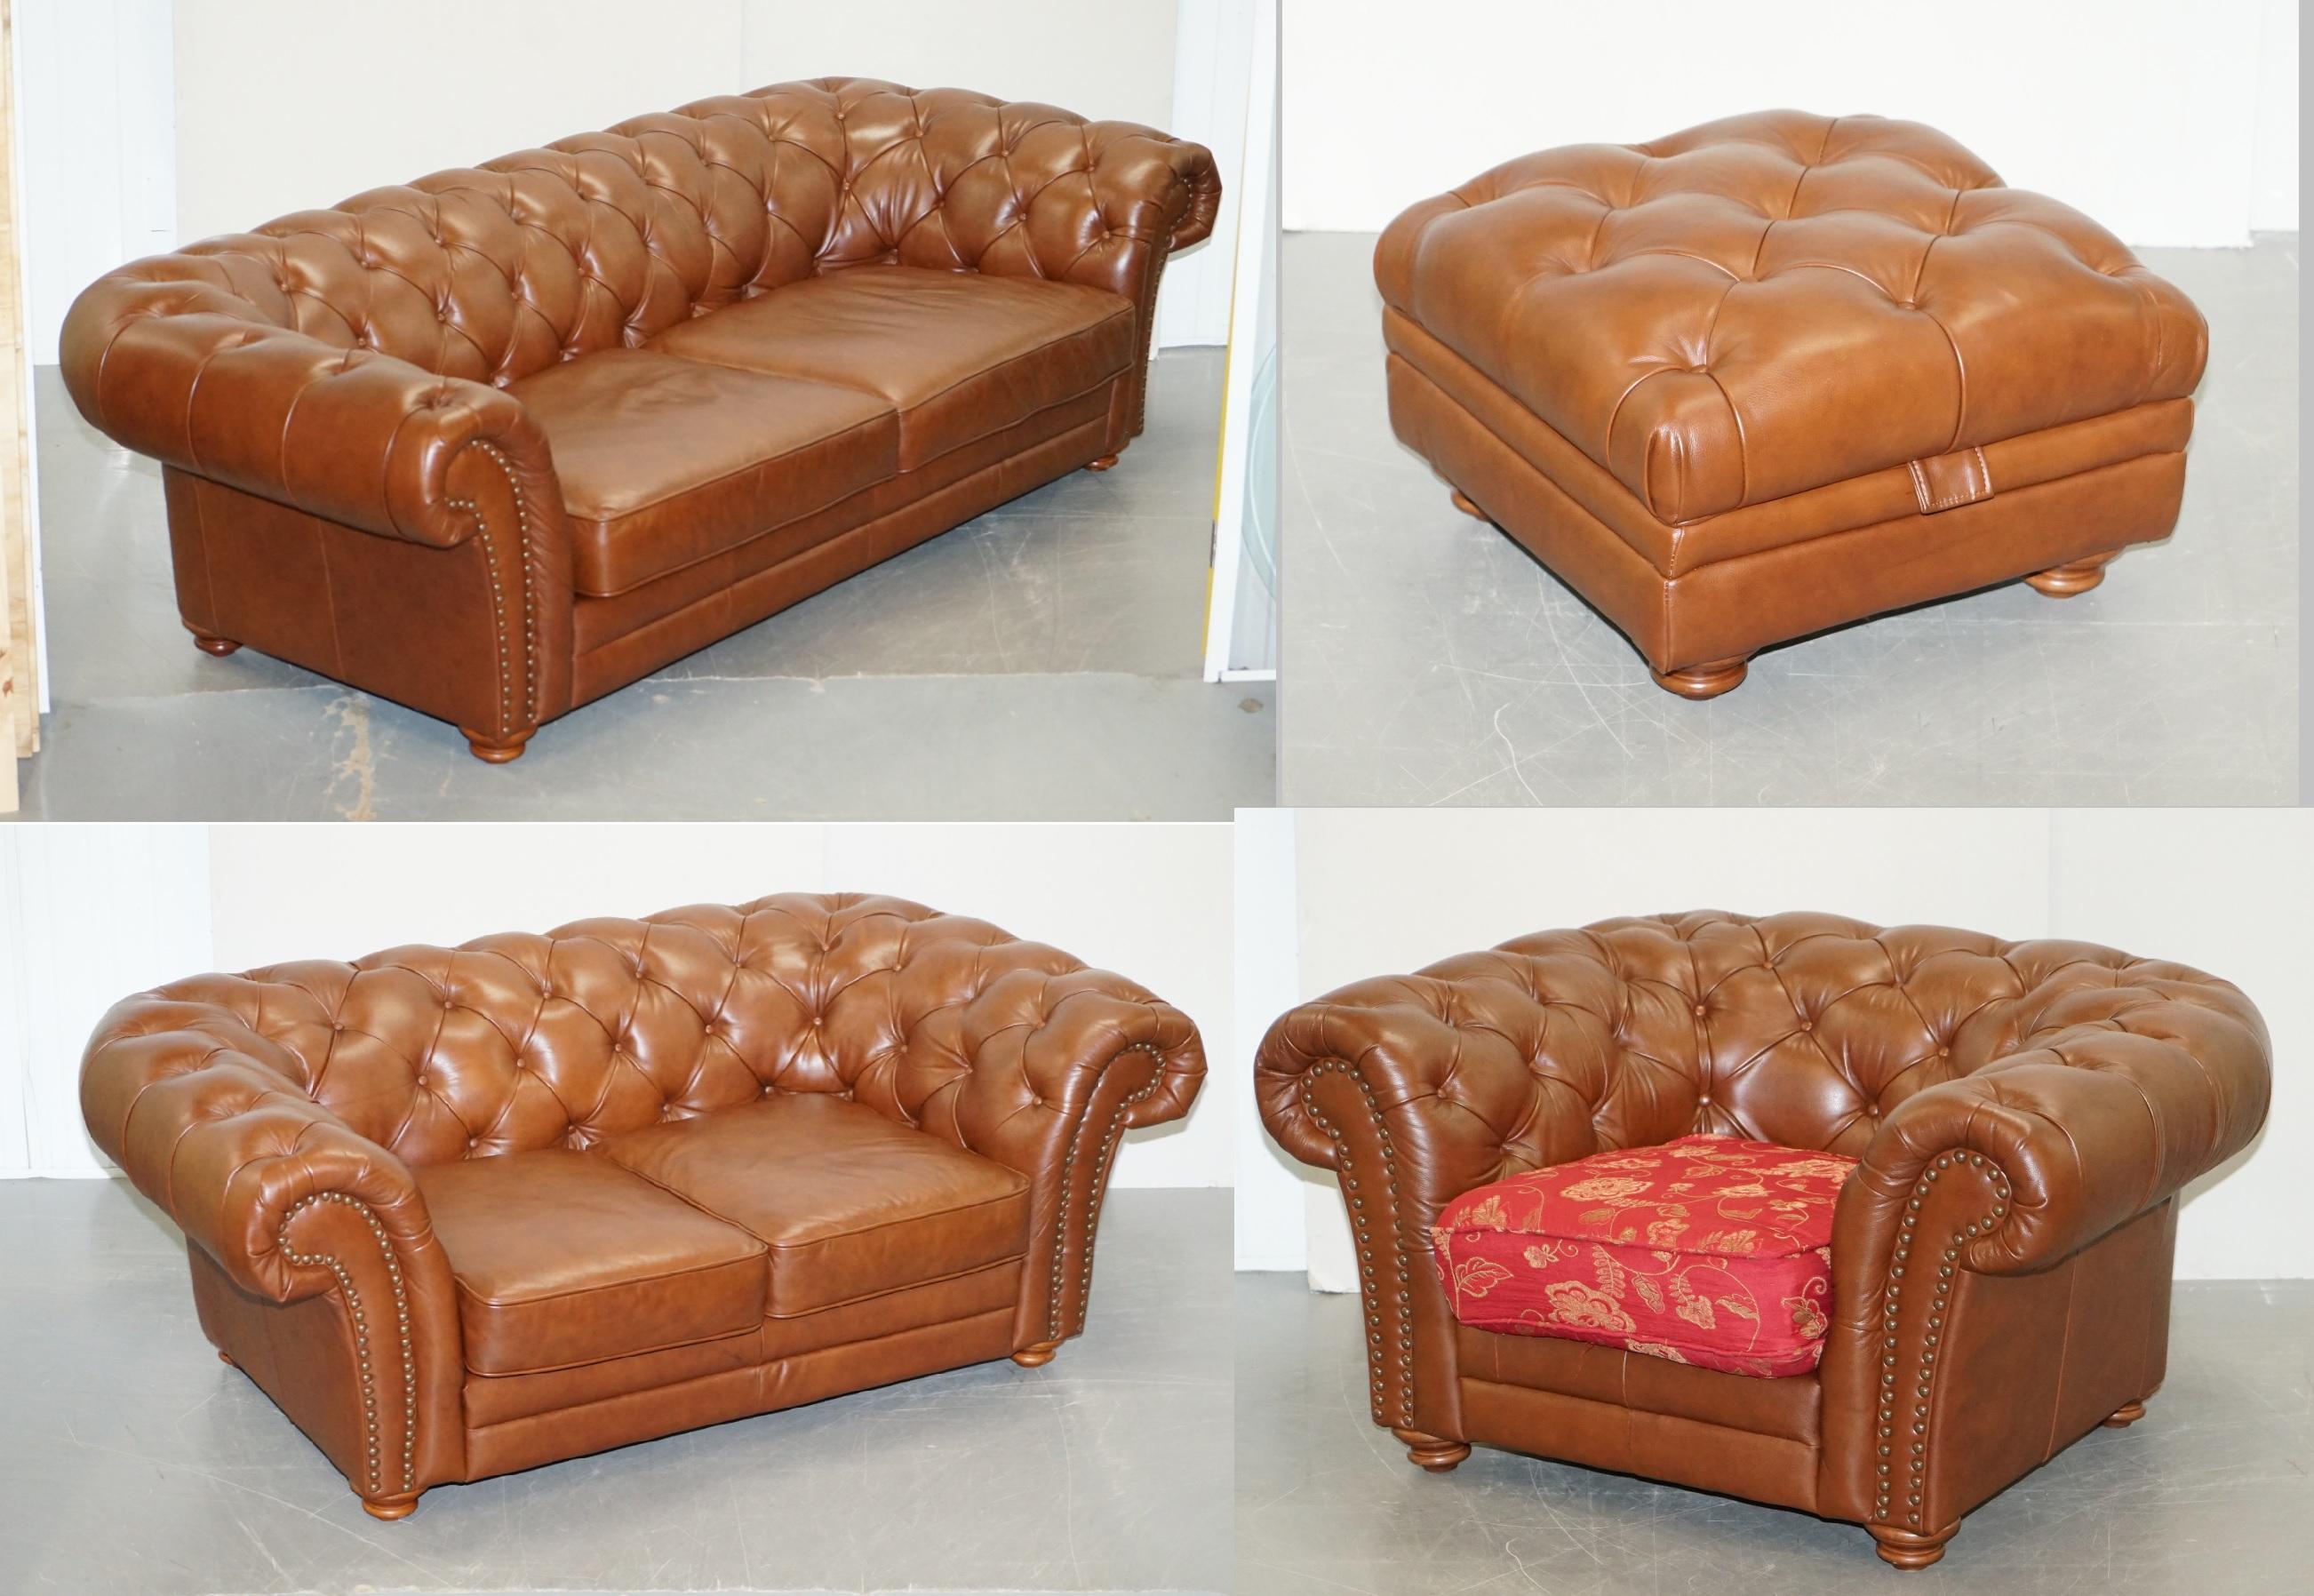 We are delighted to offer for sale this very nice two seat Chesterfield brown leather sofa made by Tetrad England which is part of a large suite

The sofa has been deep cleaned hand condition waxed and hand polished, its in very fine order